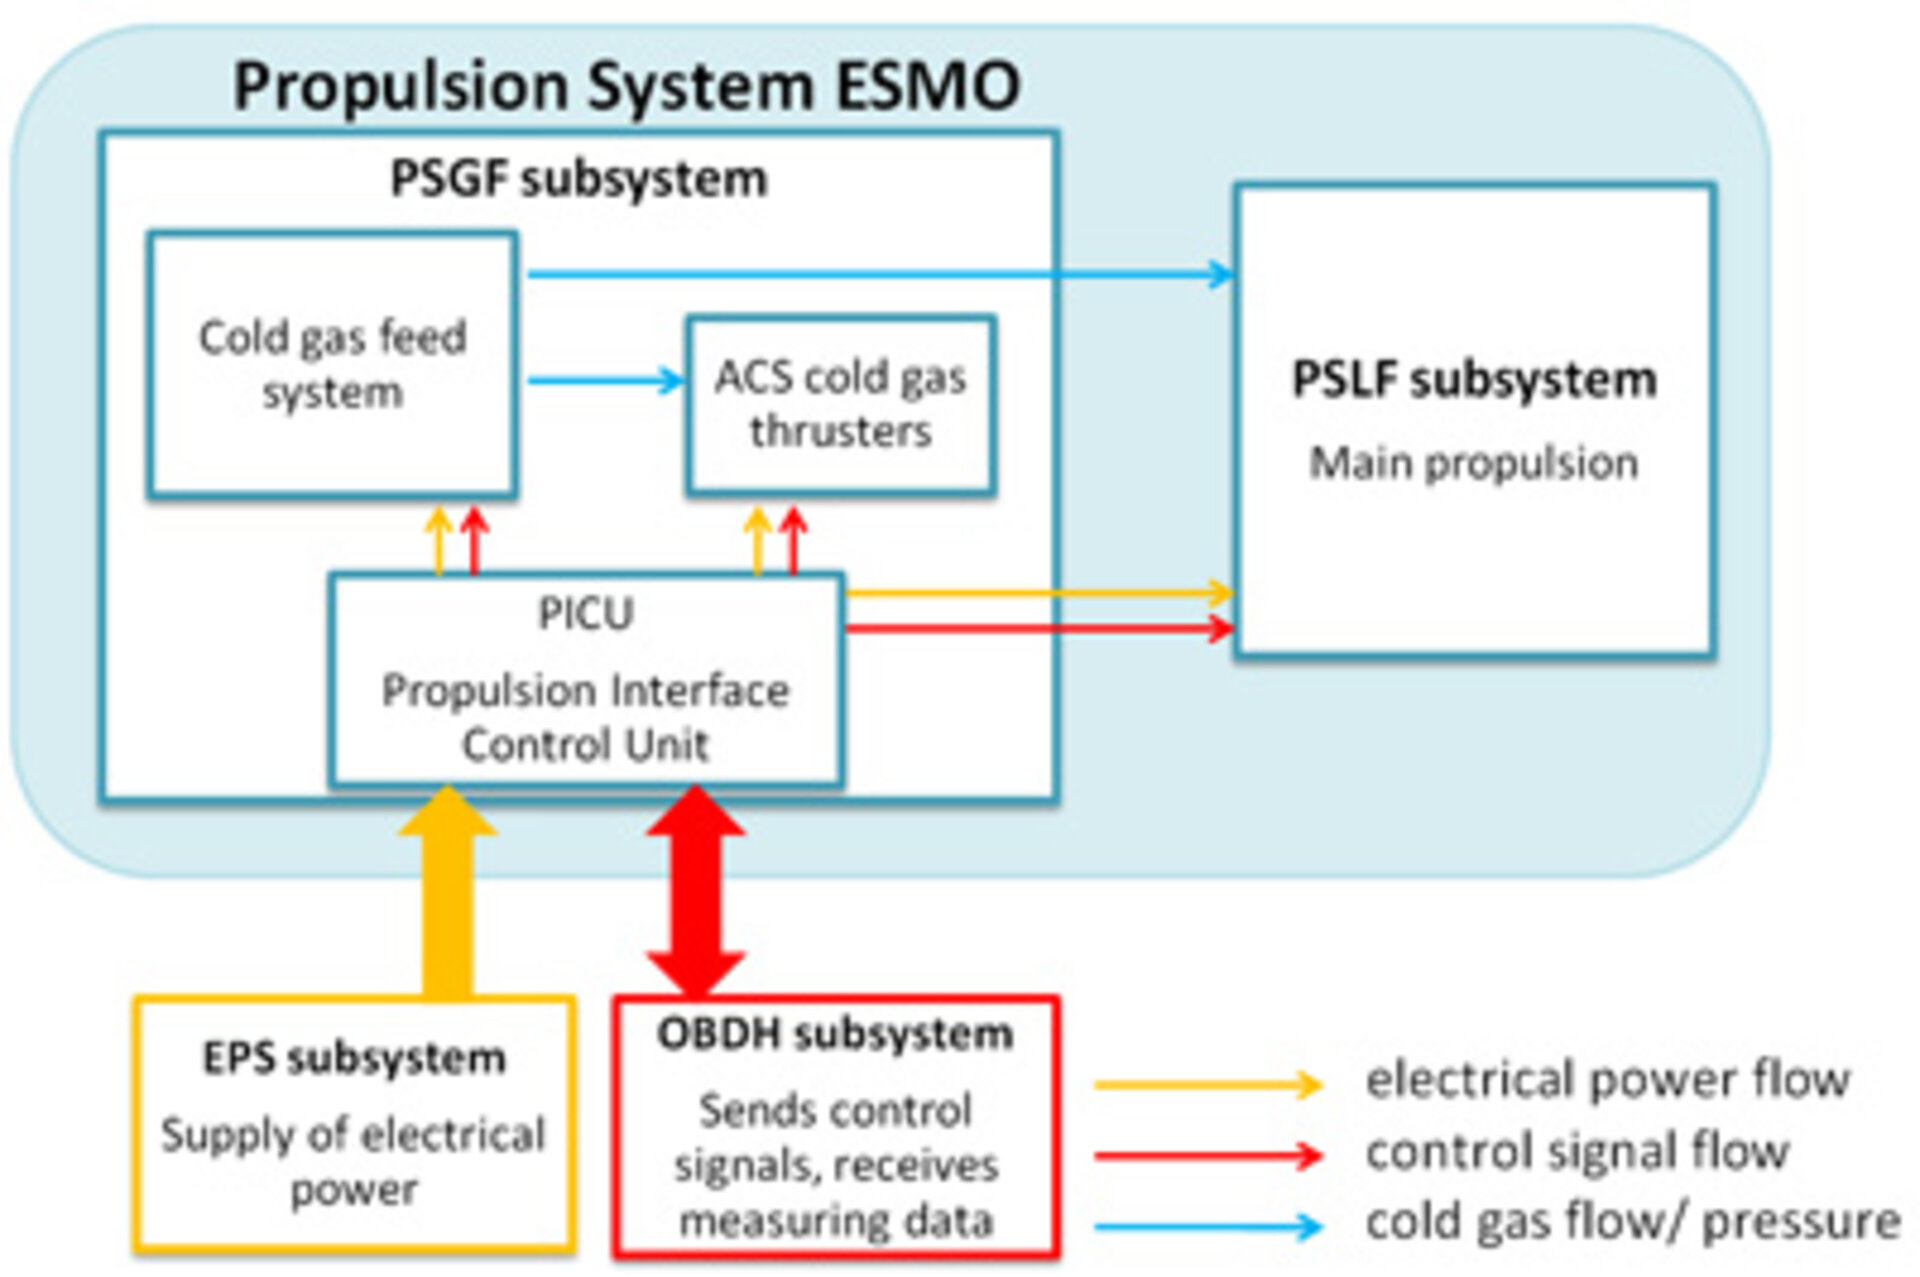 The PSGF for ESMO